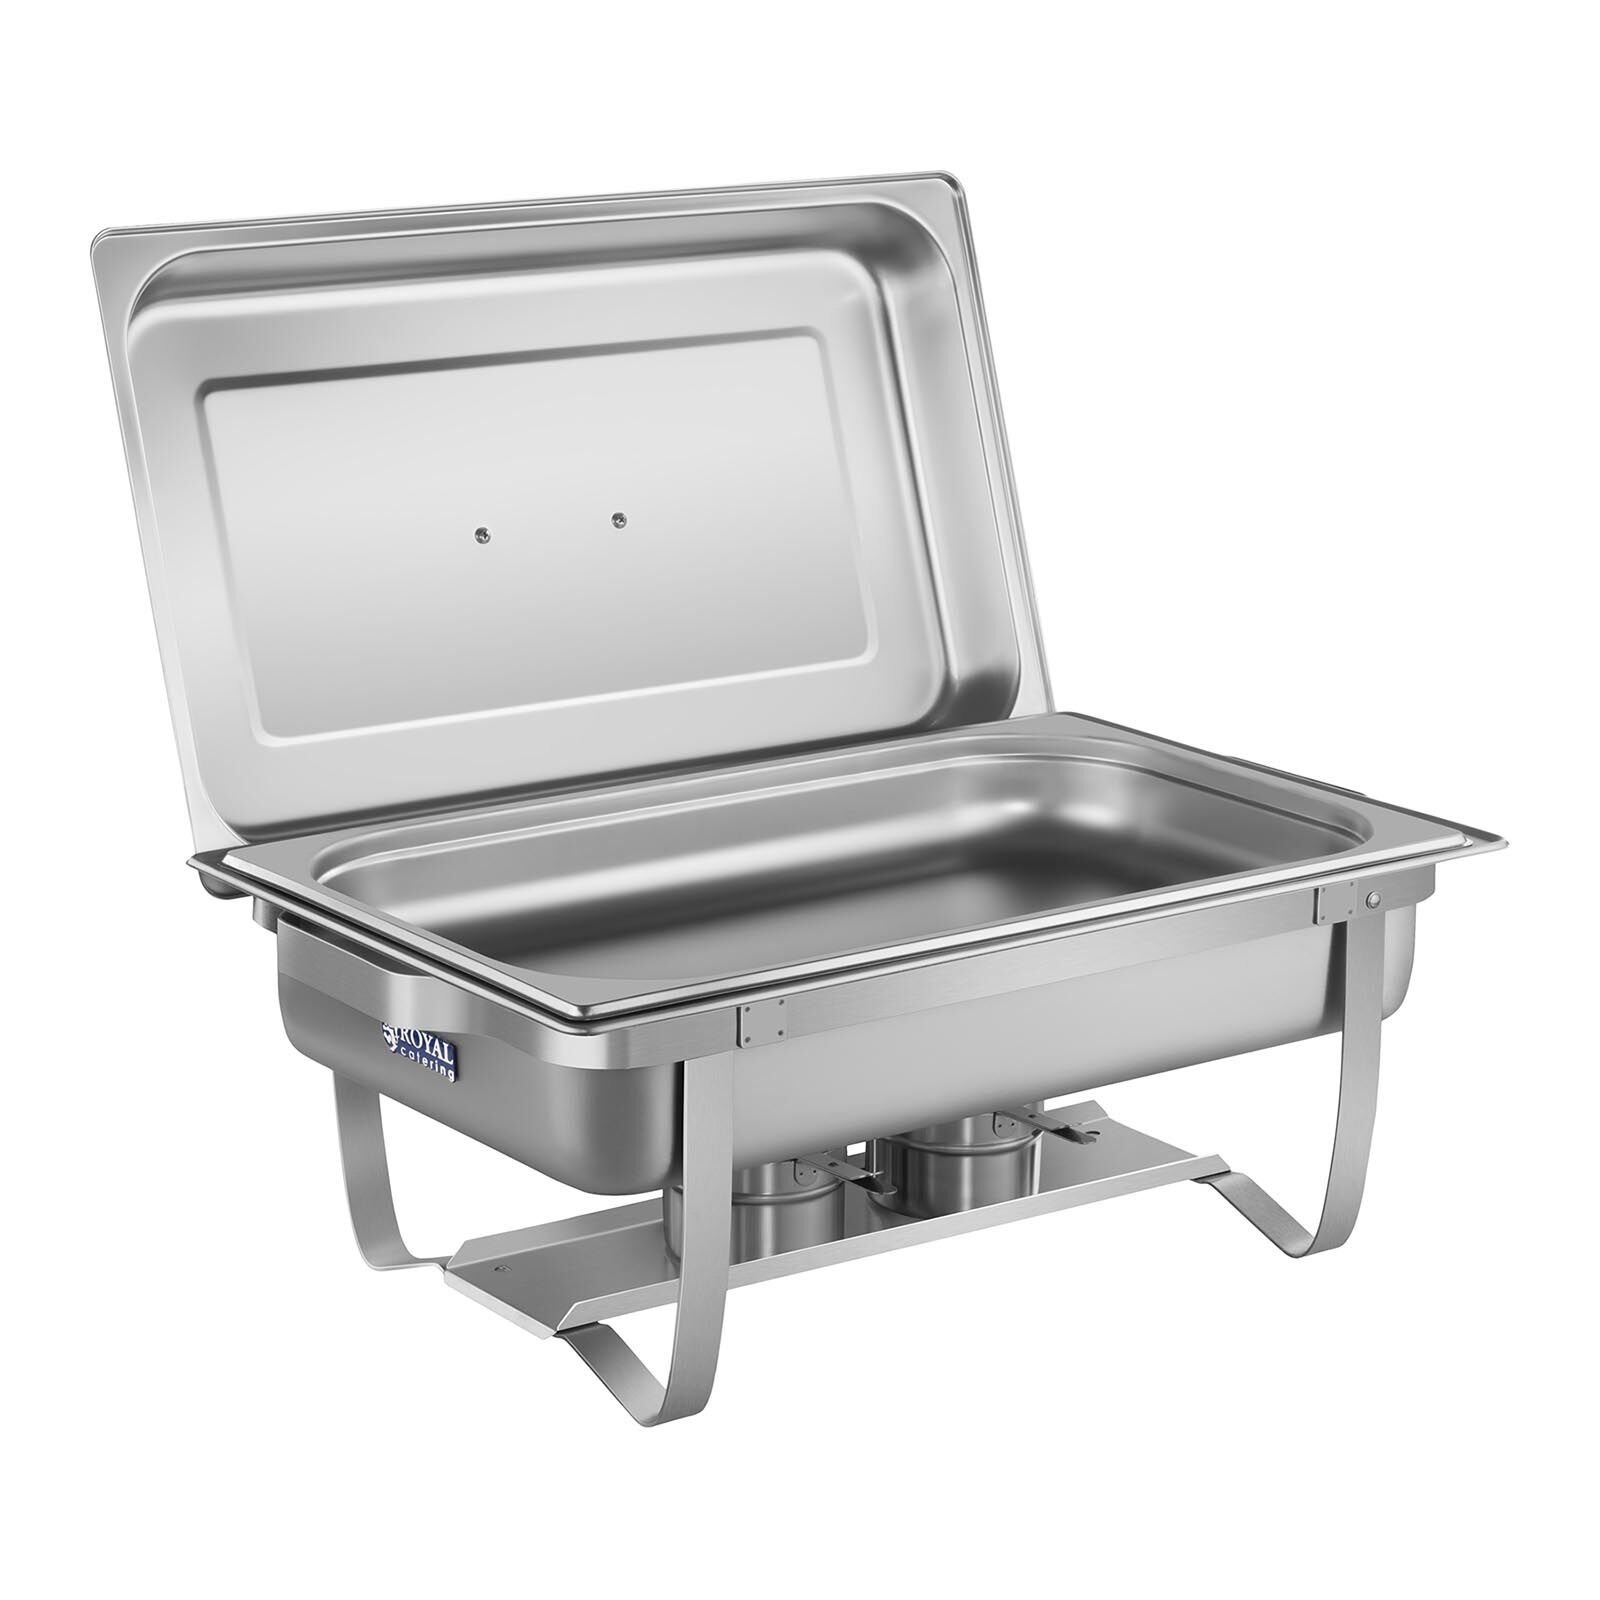 Royal Catering Chafing dish - 53 cm - GN 1/1